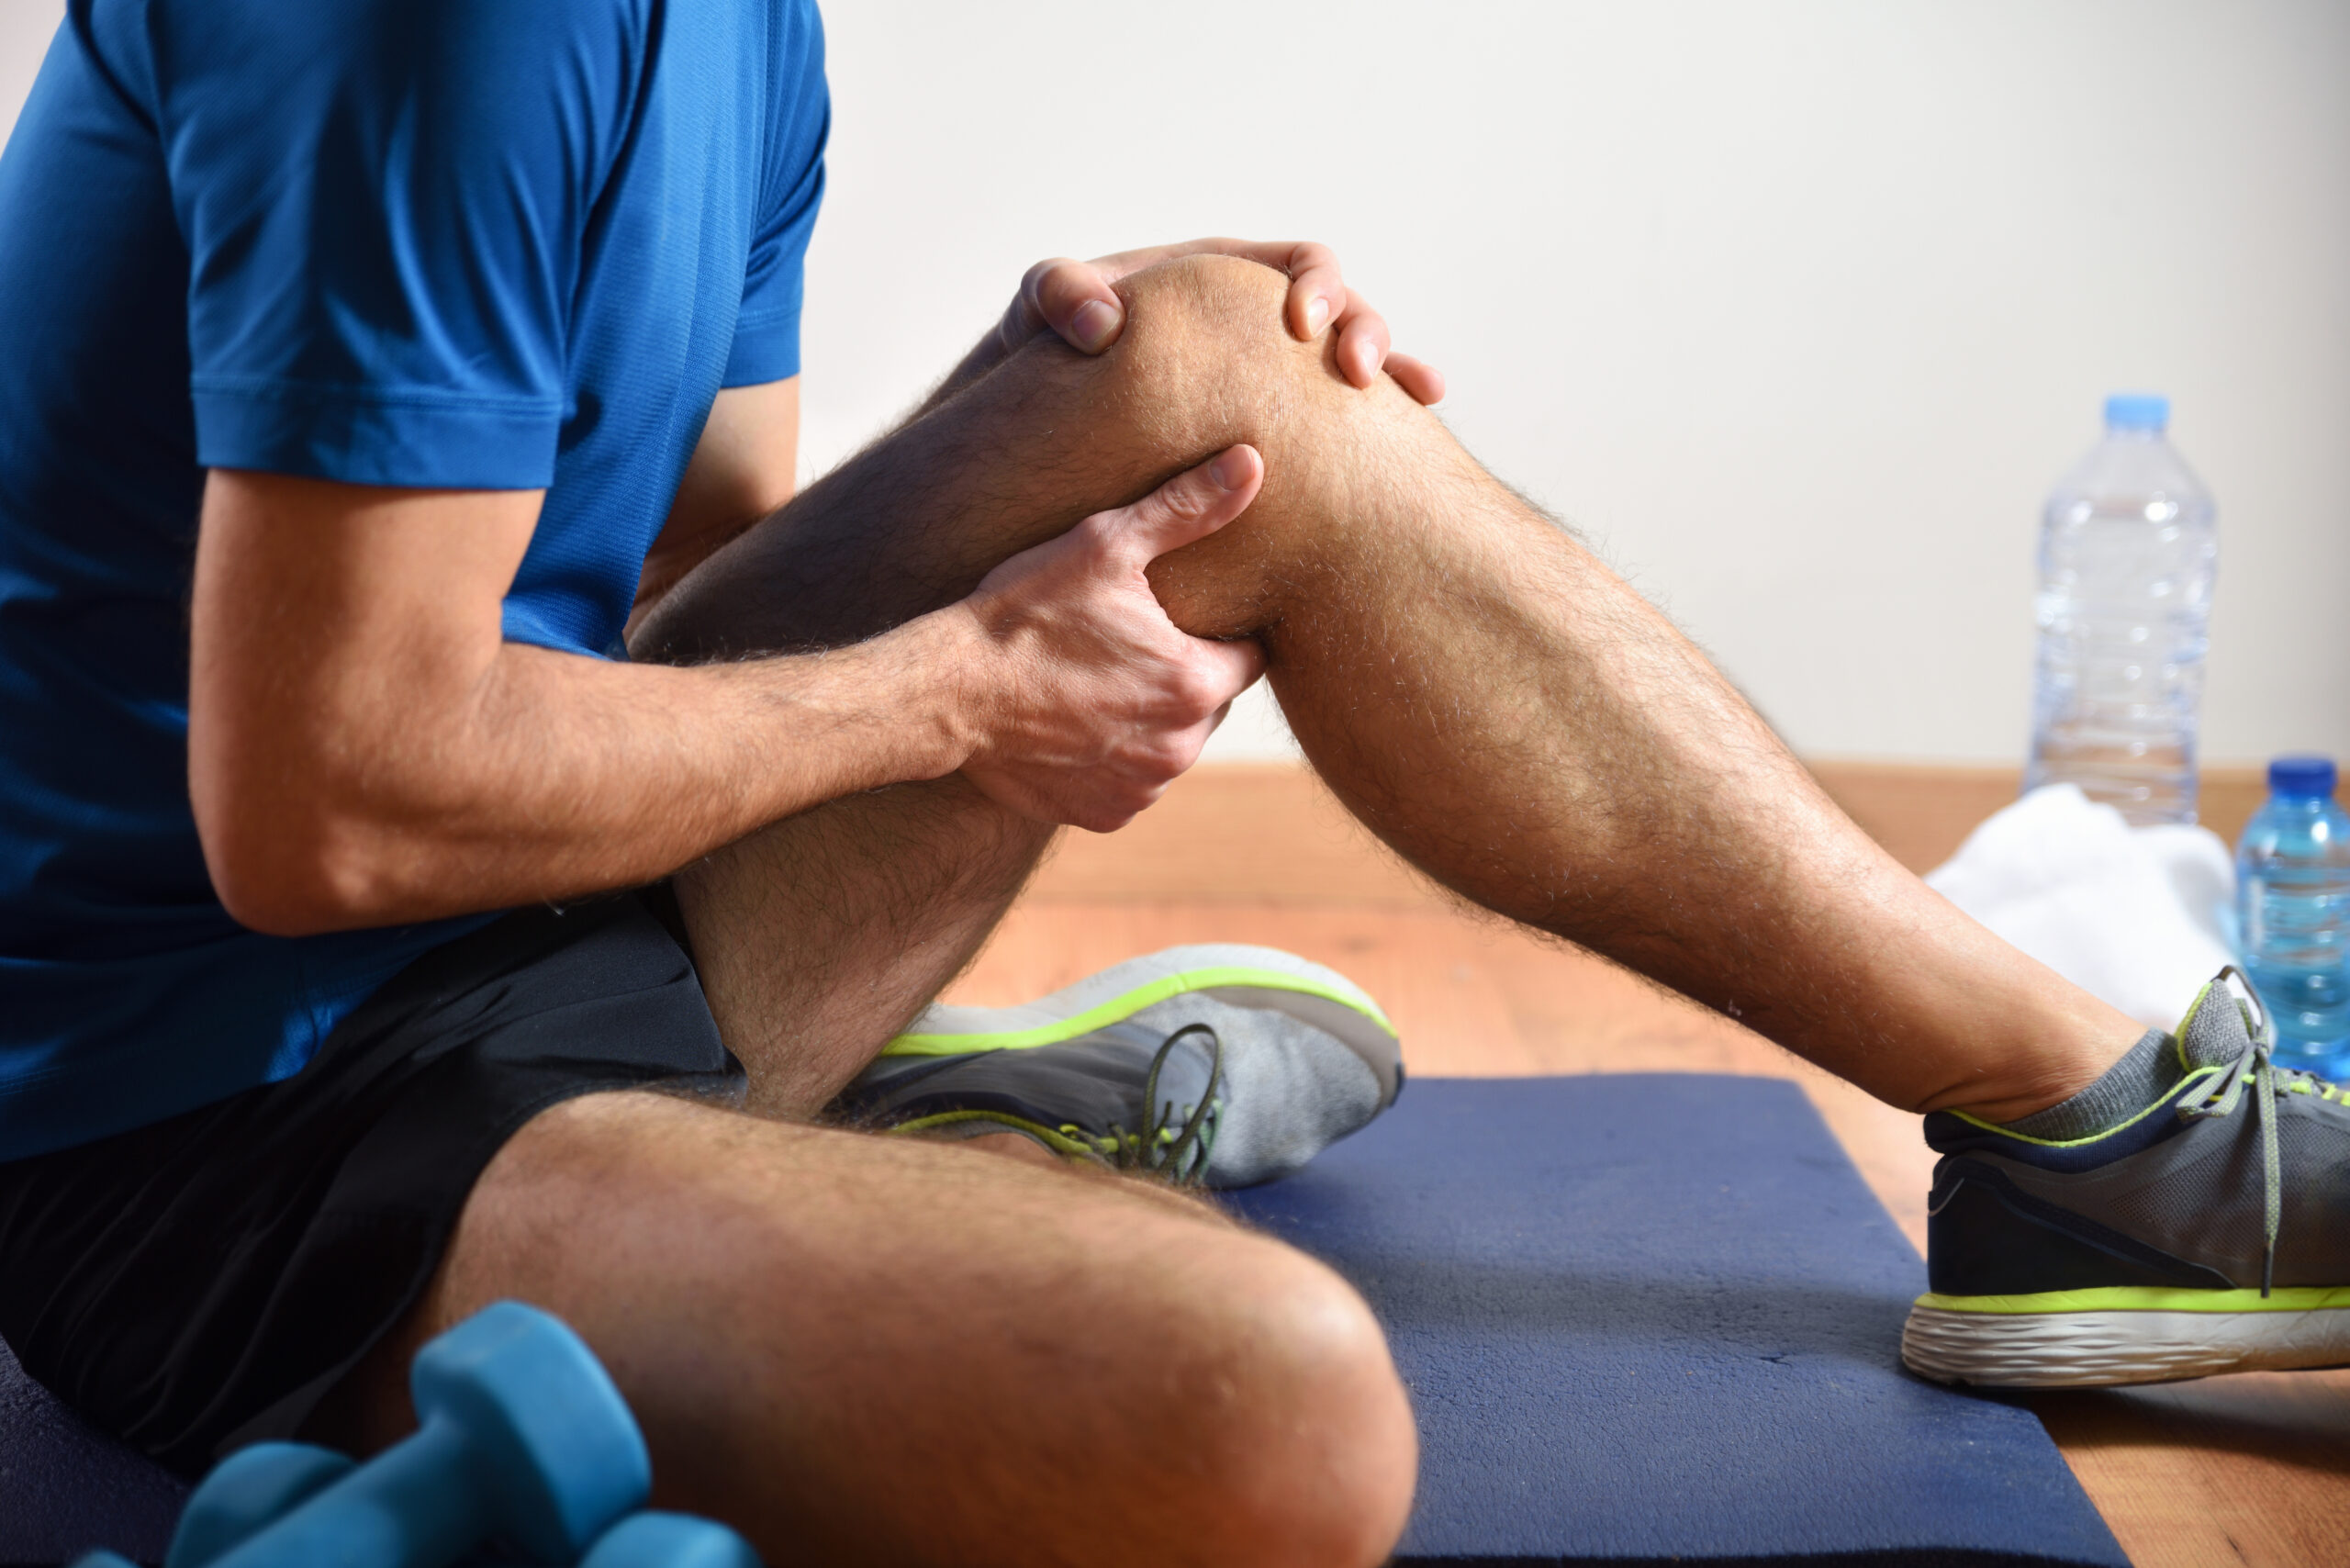 Improve Knee Function and Athletic Performance with Innovative Banded Resistance